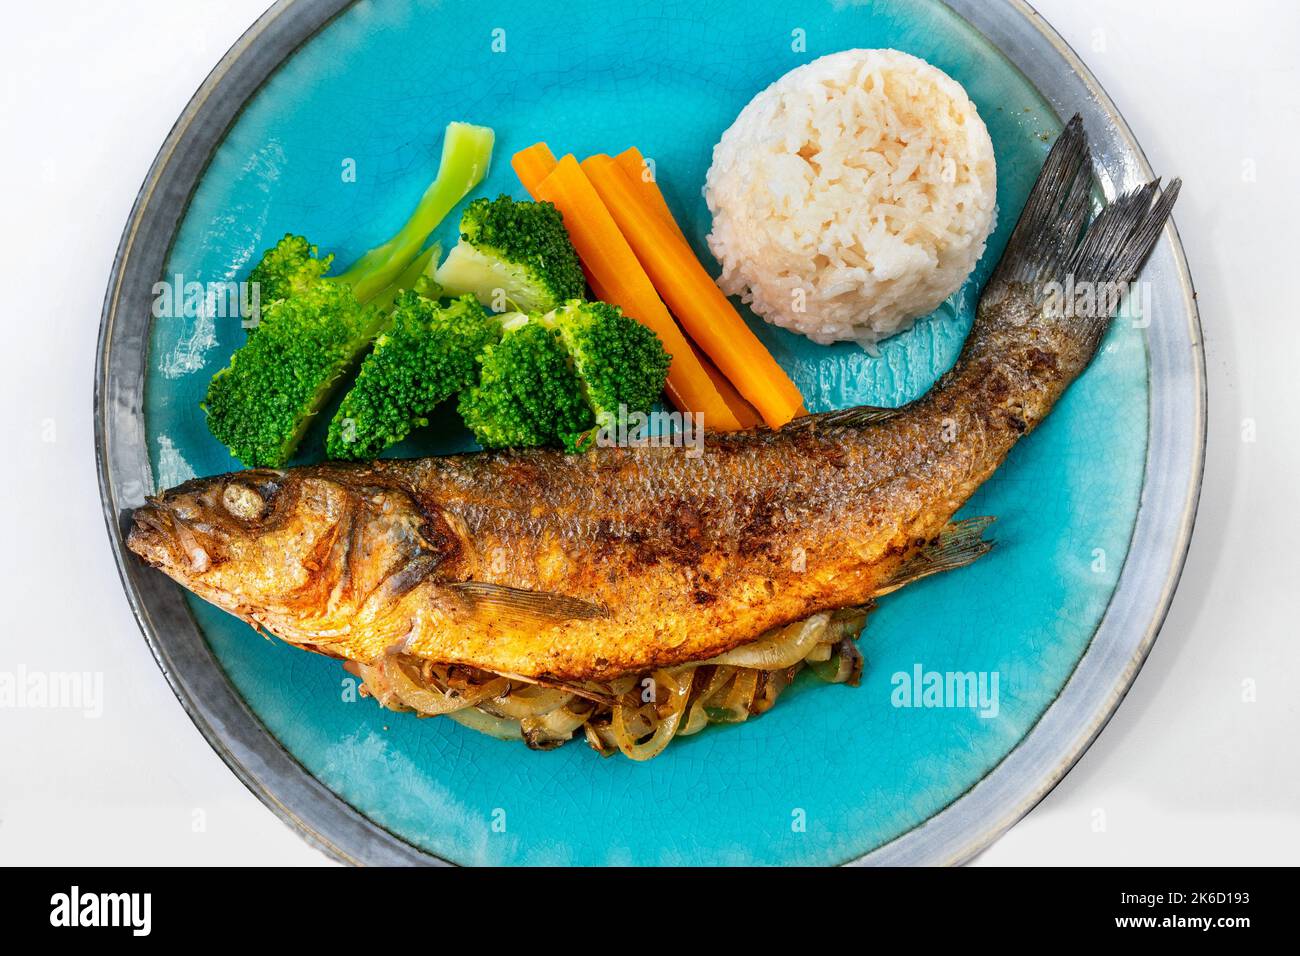 Fried trout stuffed with onion, stewed vegetable garnish (broccoli and carrot) and rice on blue plate, closeup. Stock Photo